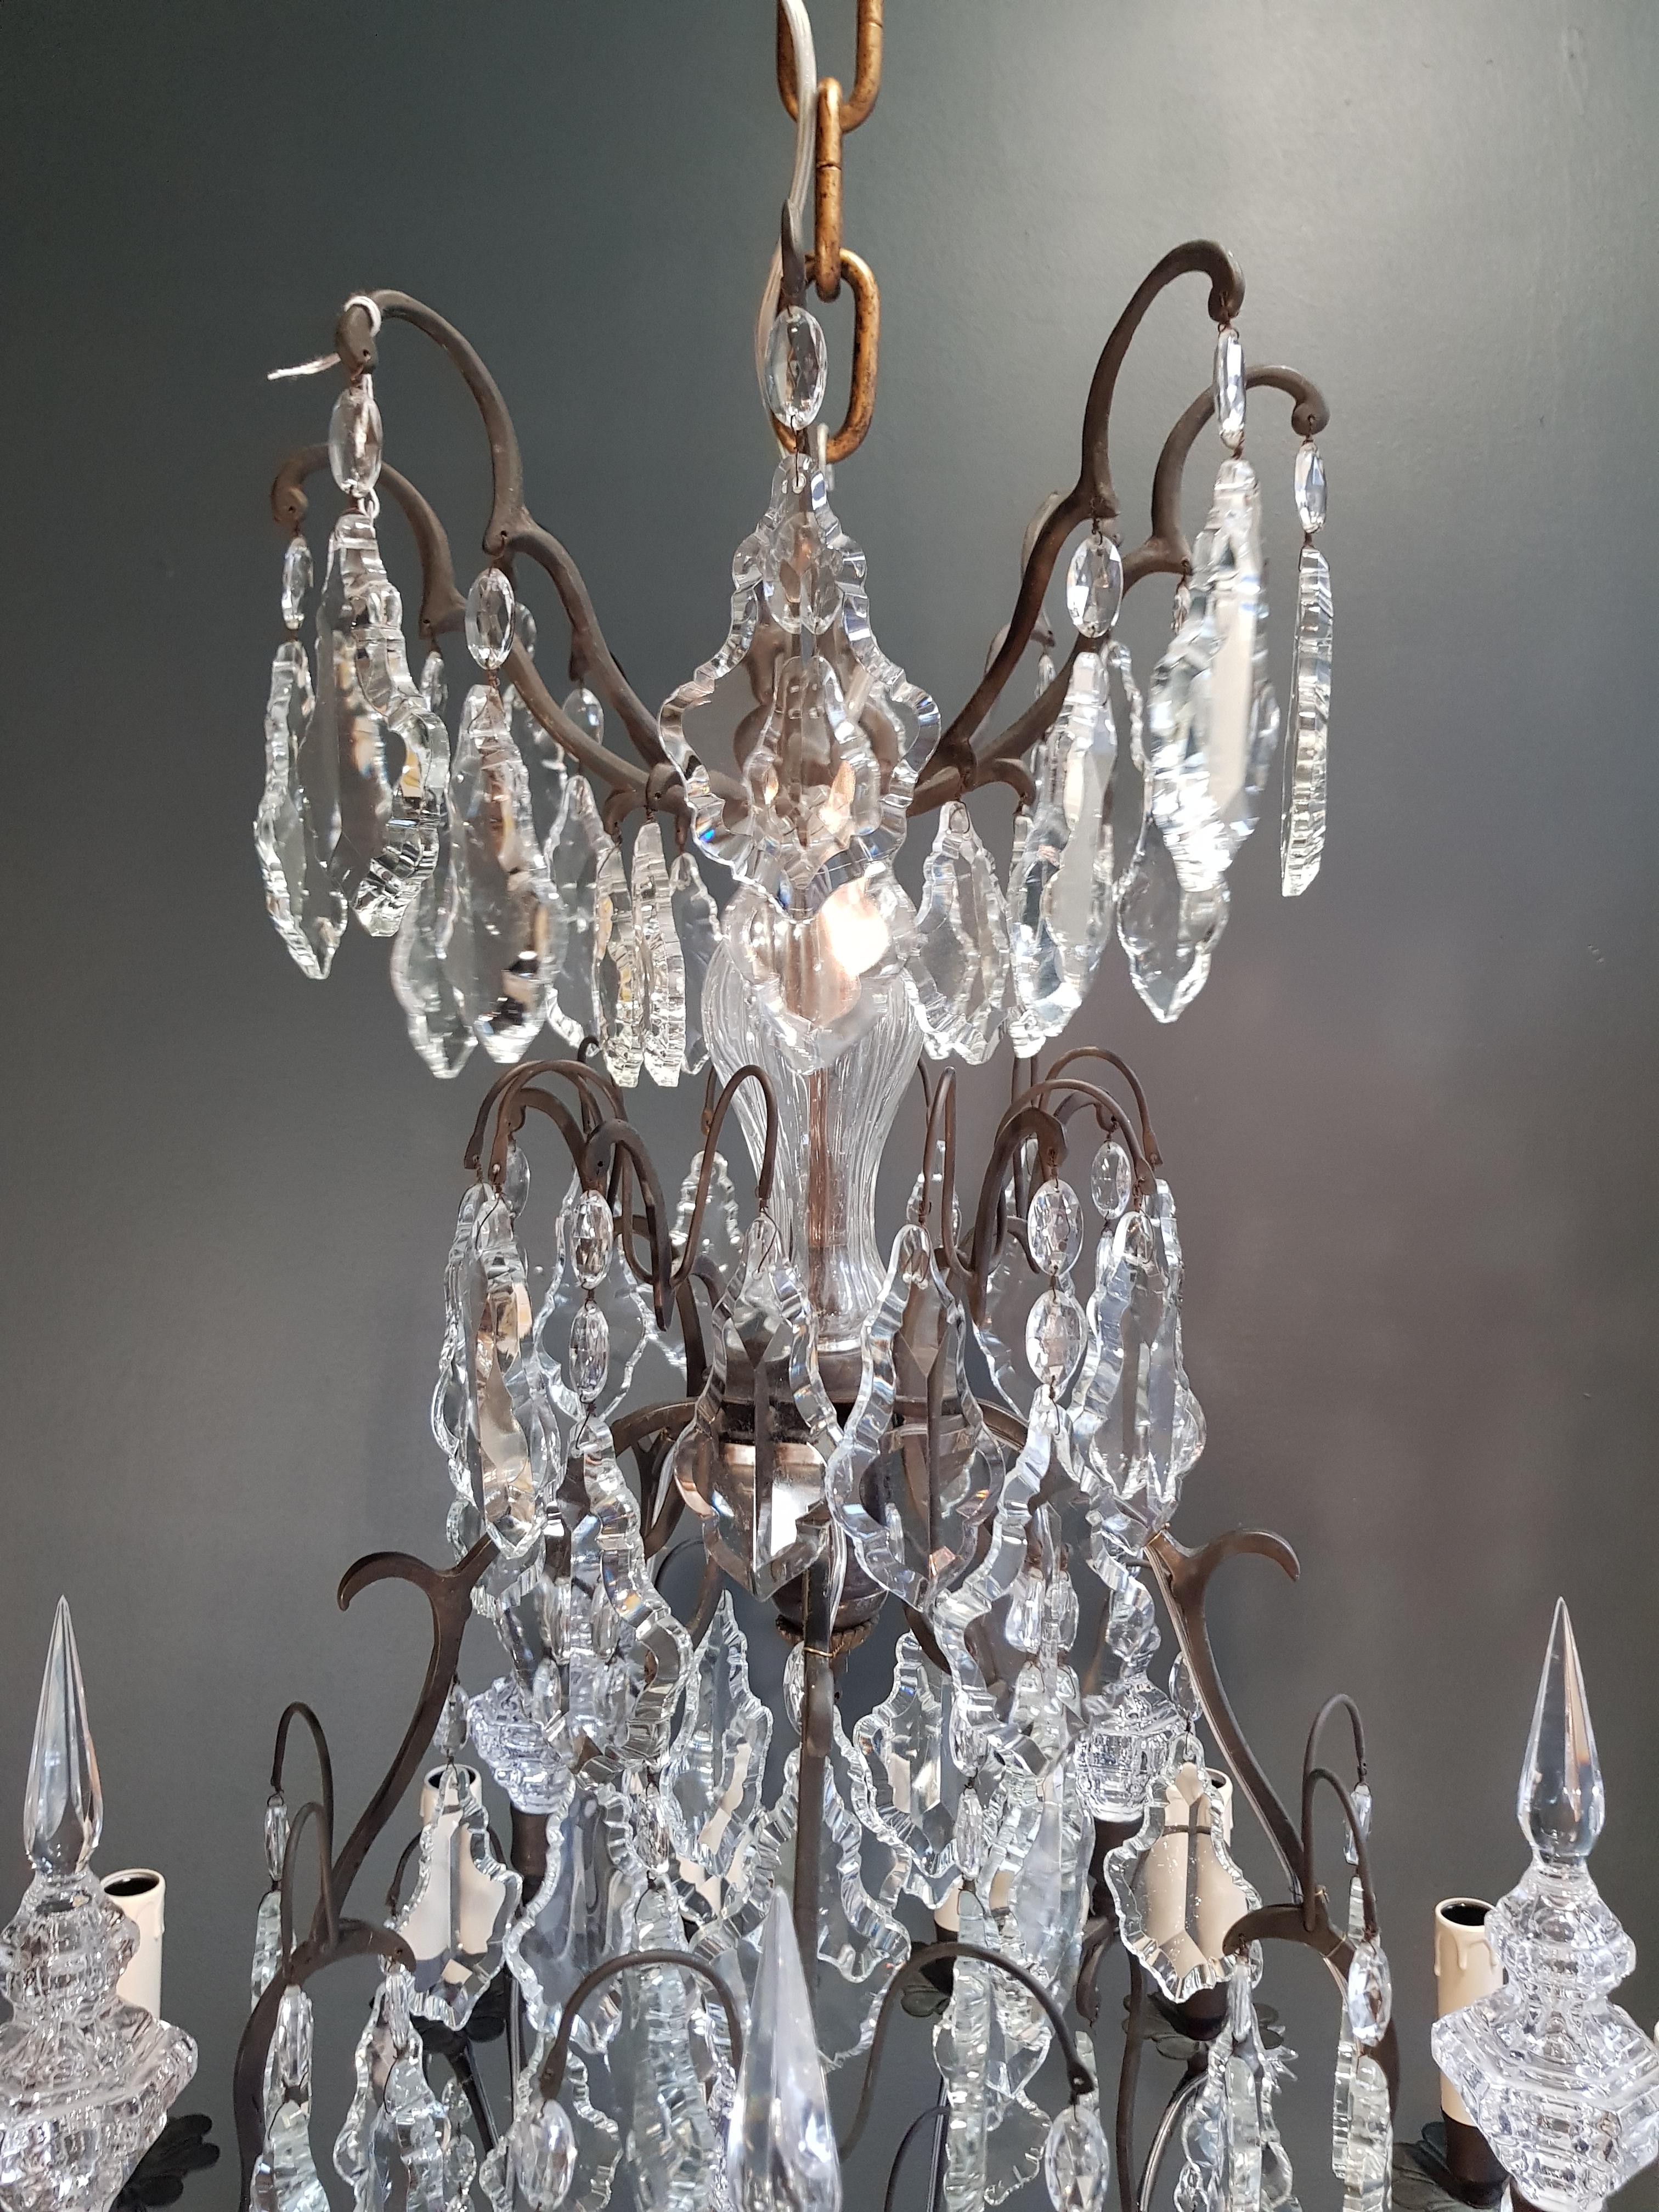 18th Century Fine French Crystal Chandelier Ceiling Classic traditional Black Baroque Massive